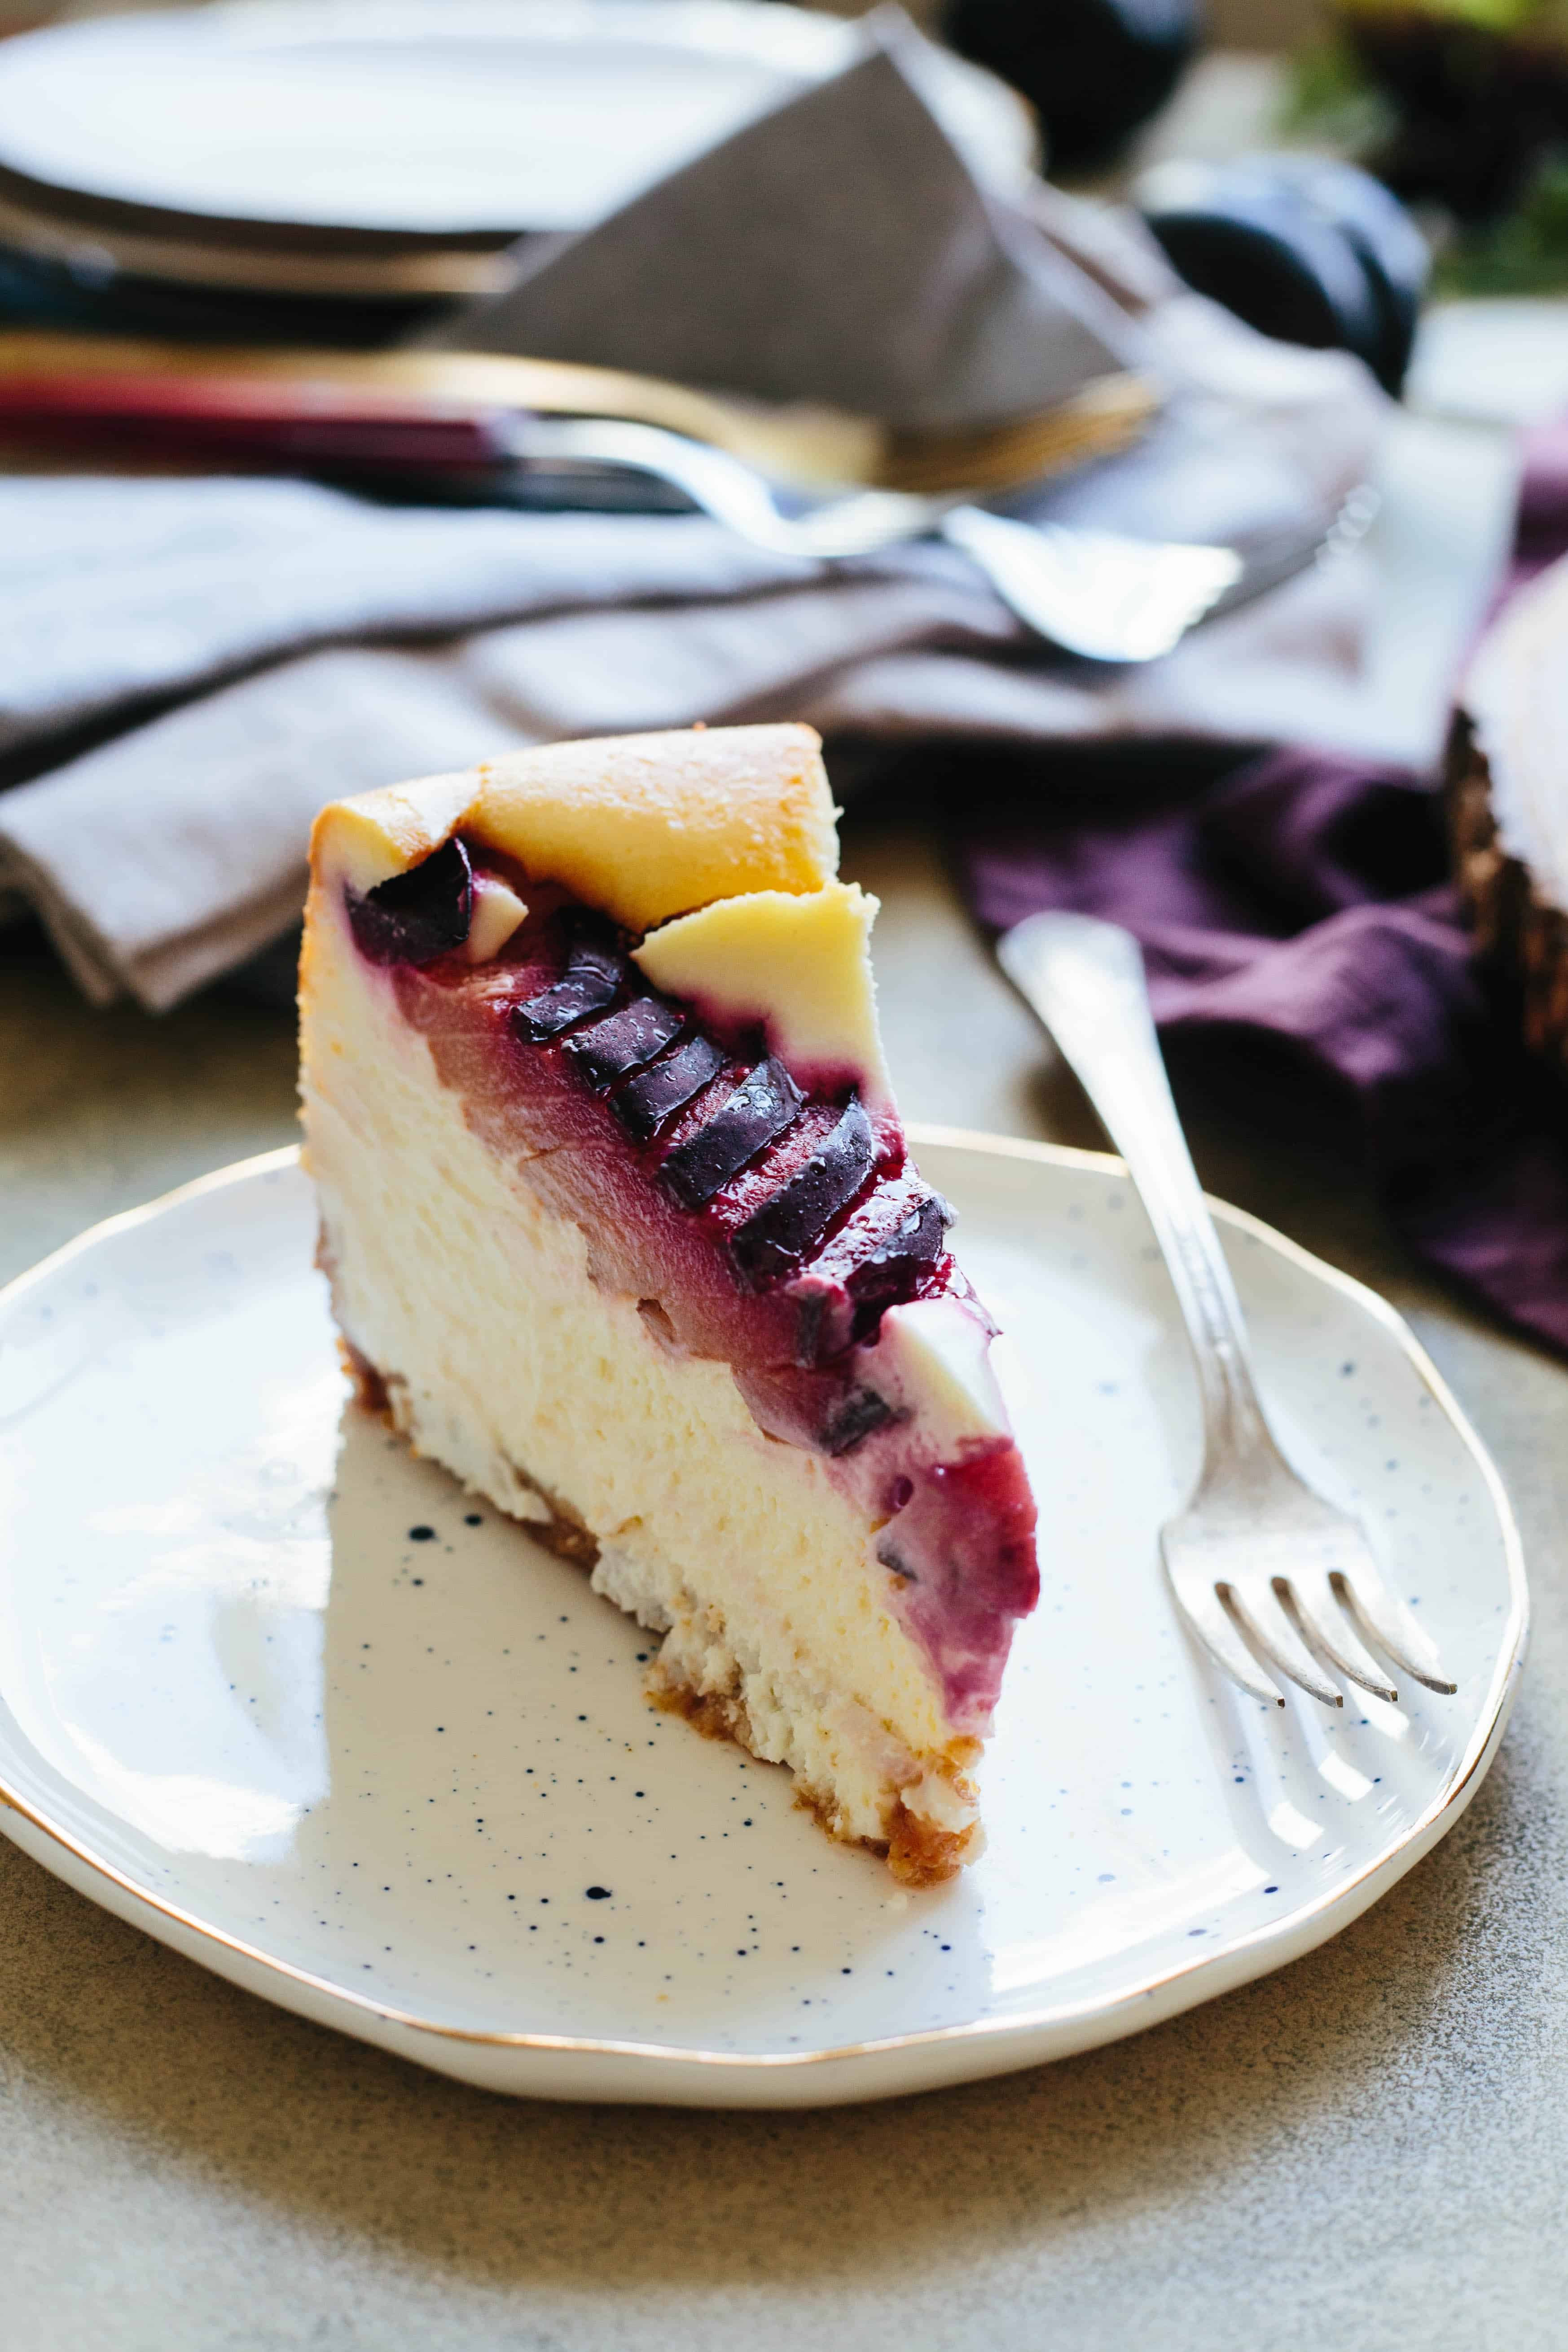 A thin slice of plum ricotta cheesecake on a speckled white dessert plate.